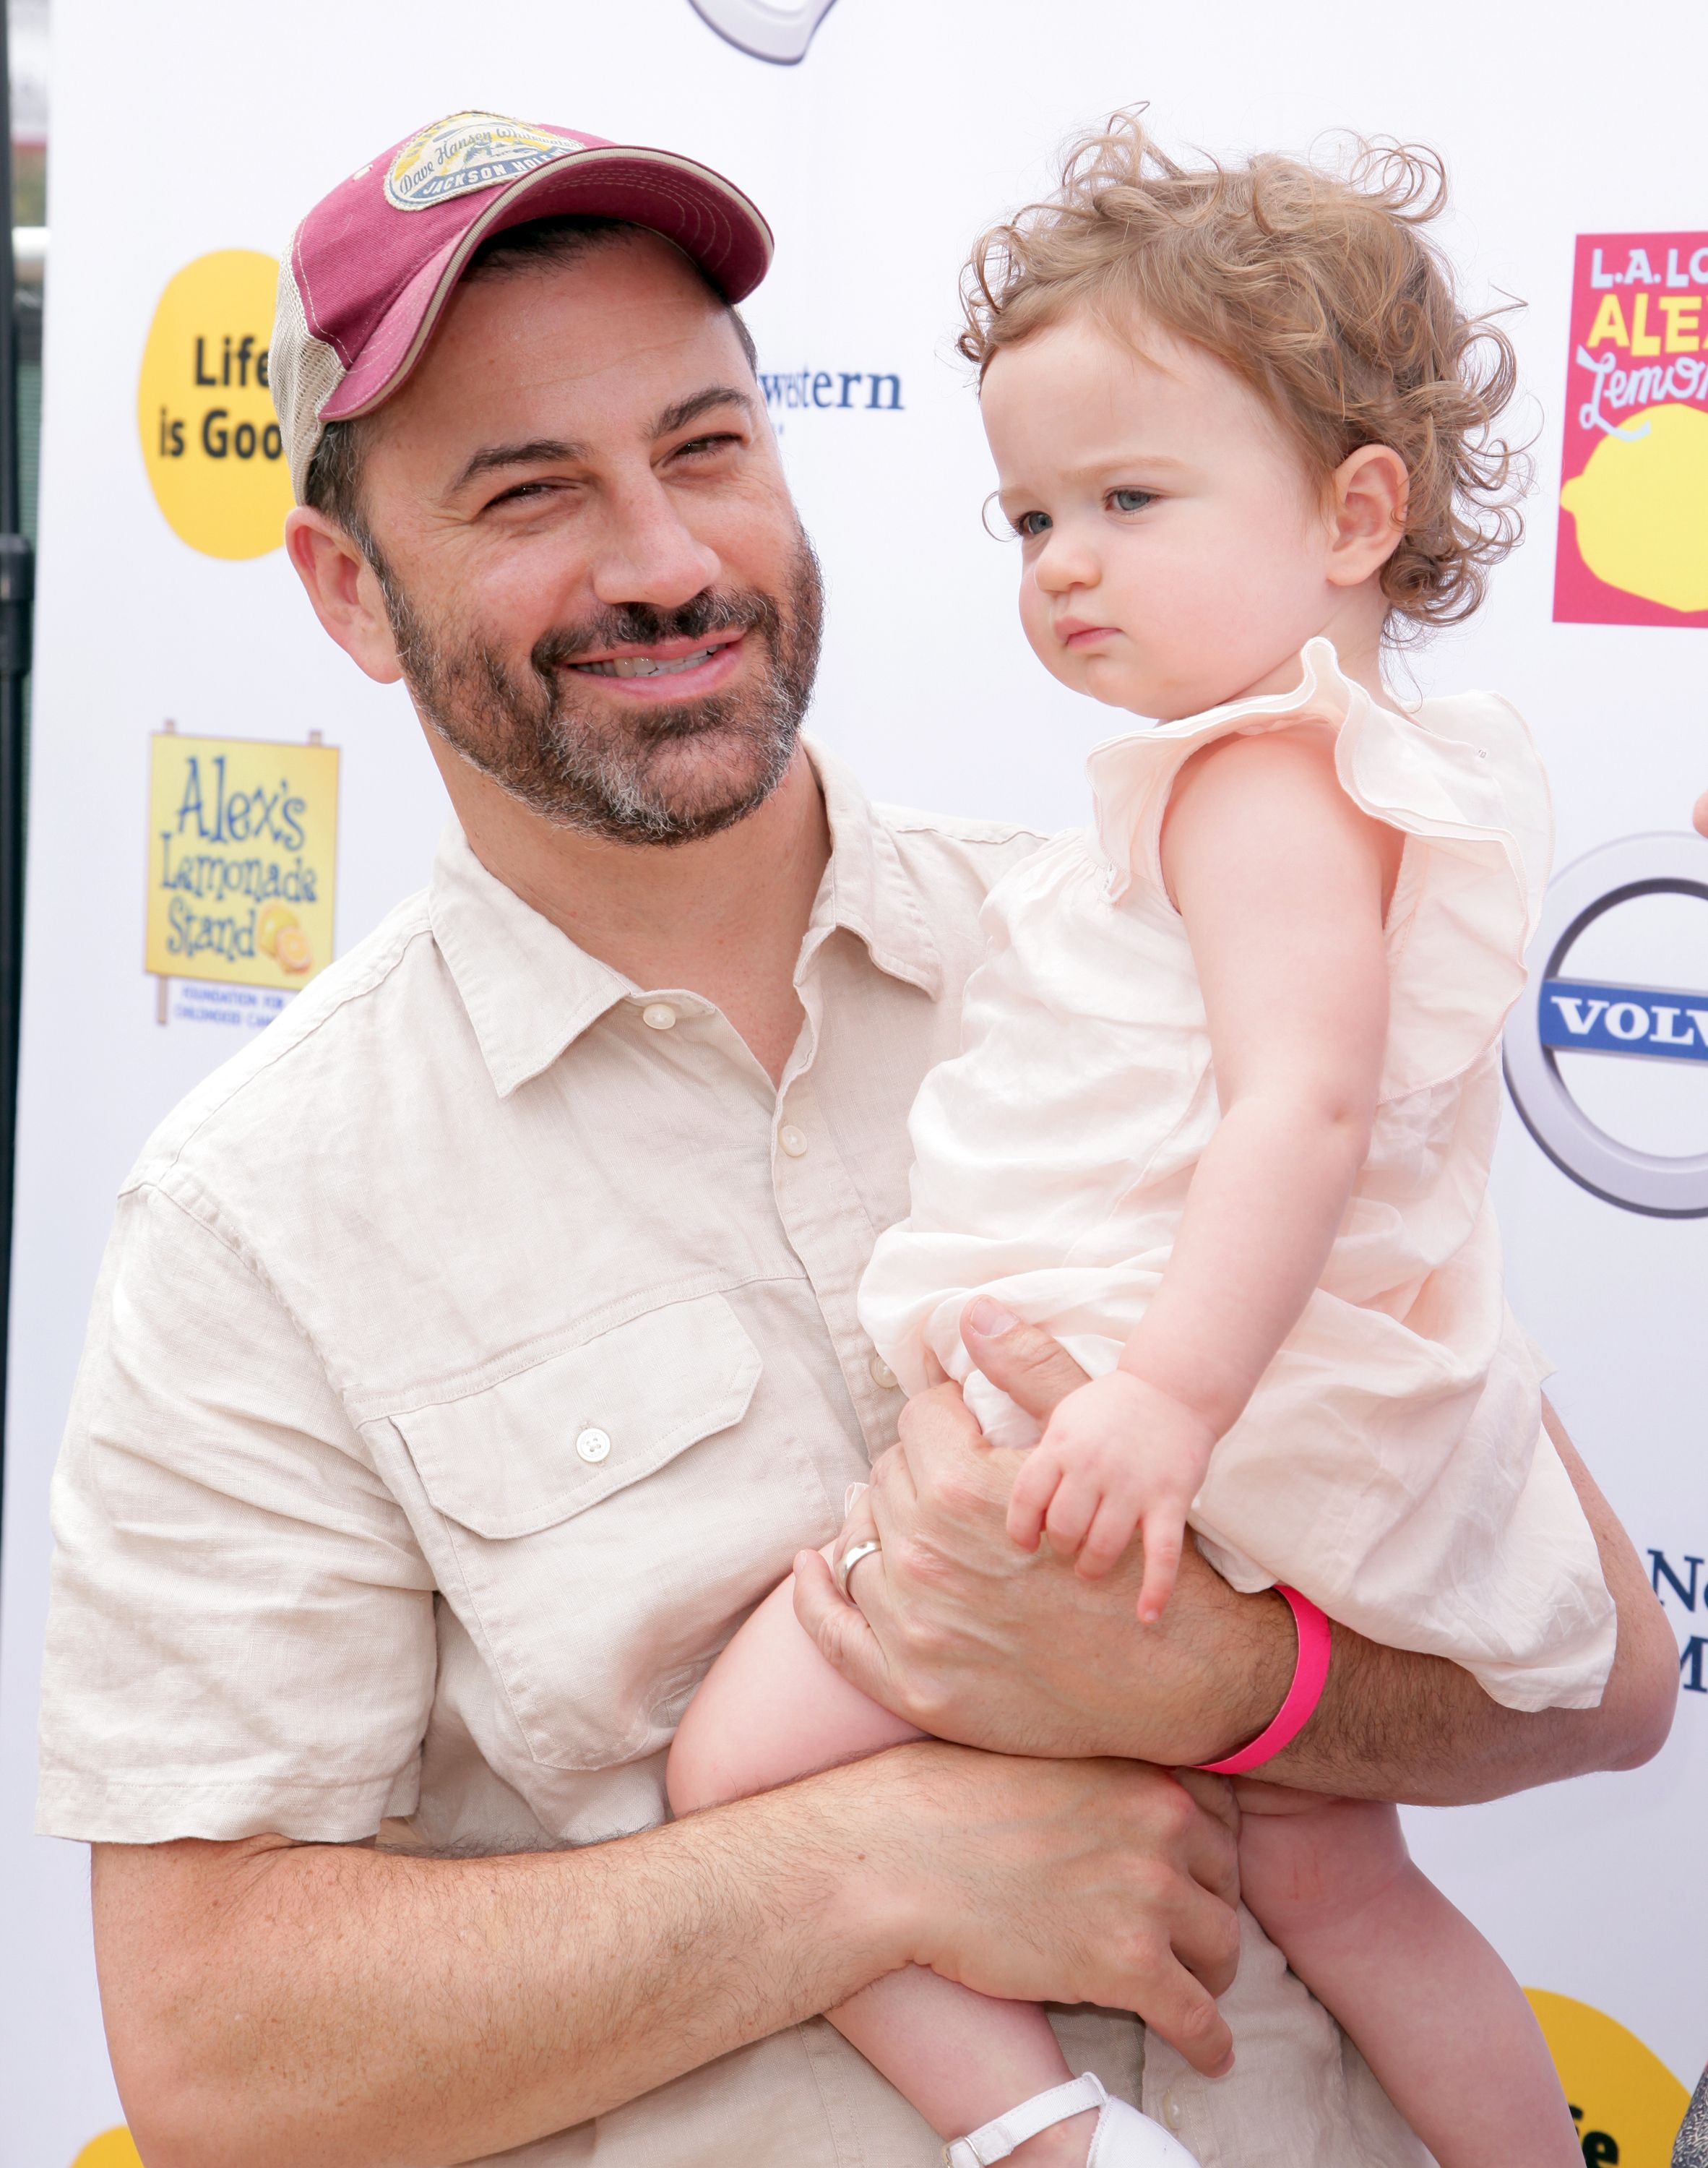 Jimmy Kimmel and Jane Kimmel during the 6th Annual L.A. Loves Alex's Lemonade at UCLA on September 12, 2015 in Los Angeles, California. | Source: Getty Images